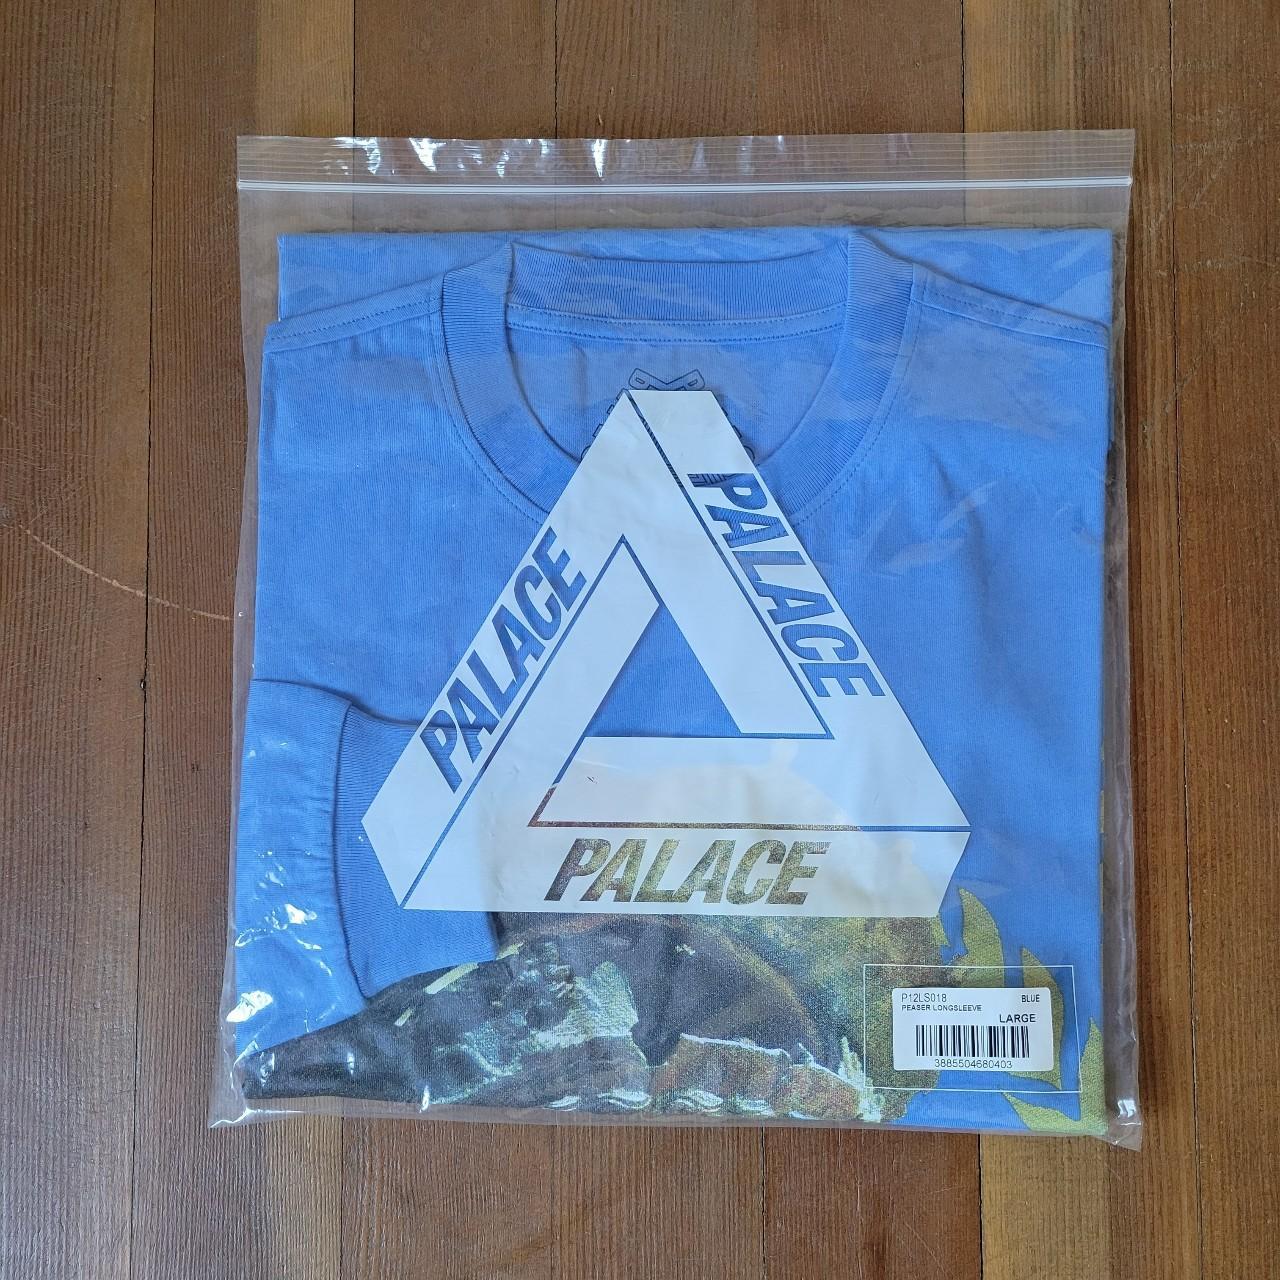 Palace Men's Blue and Gold T-shirt (2)